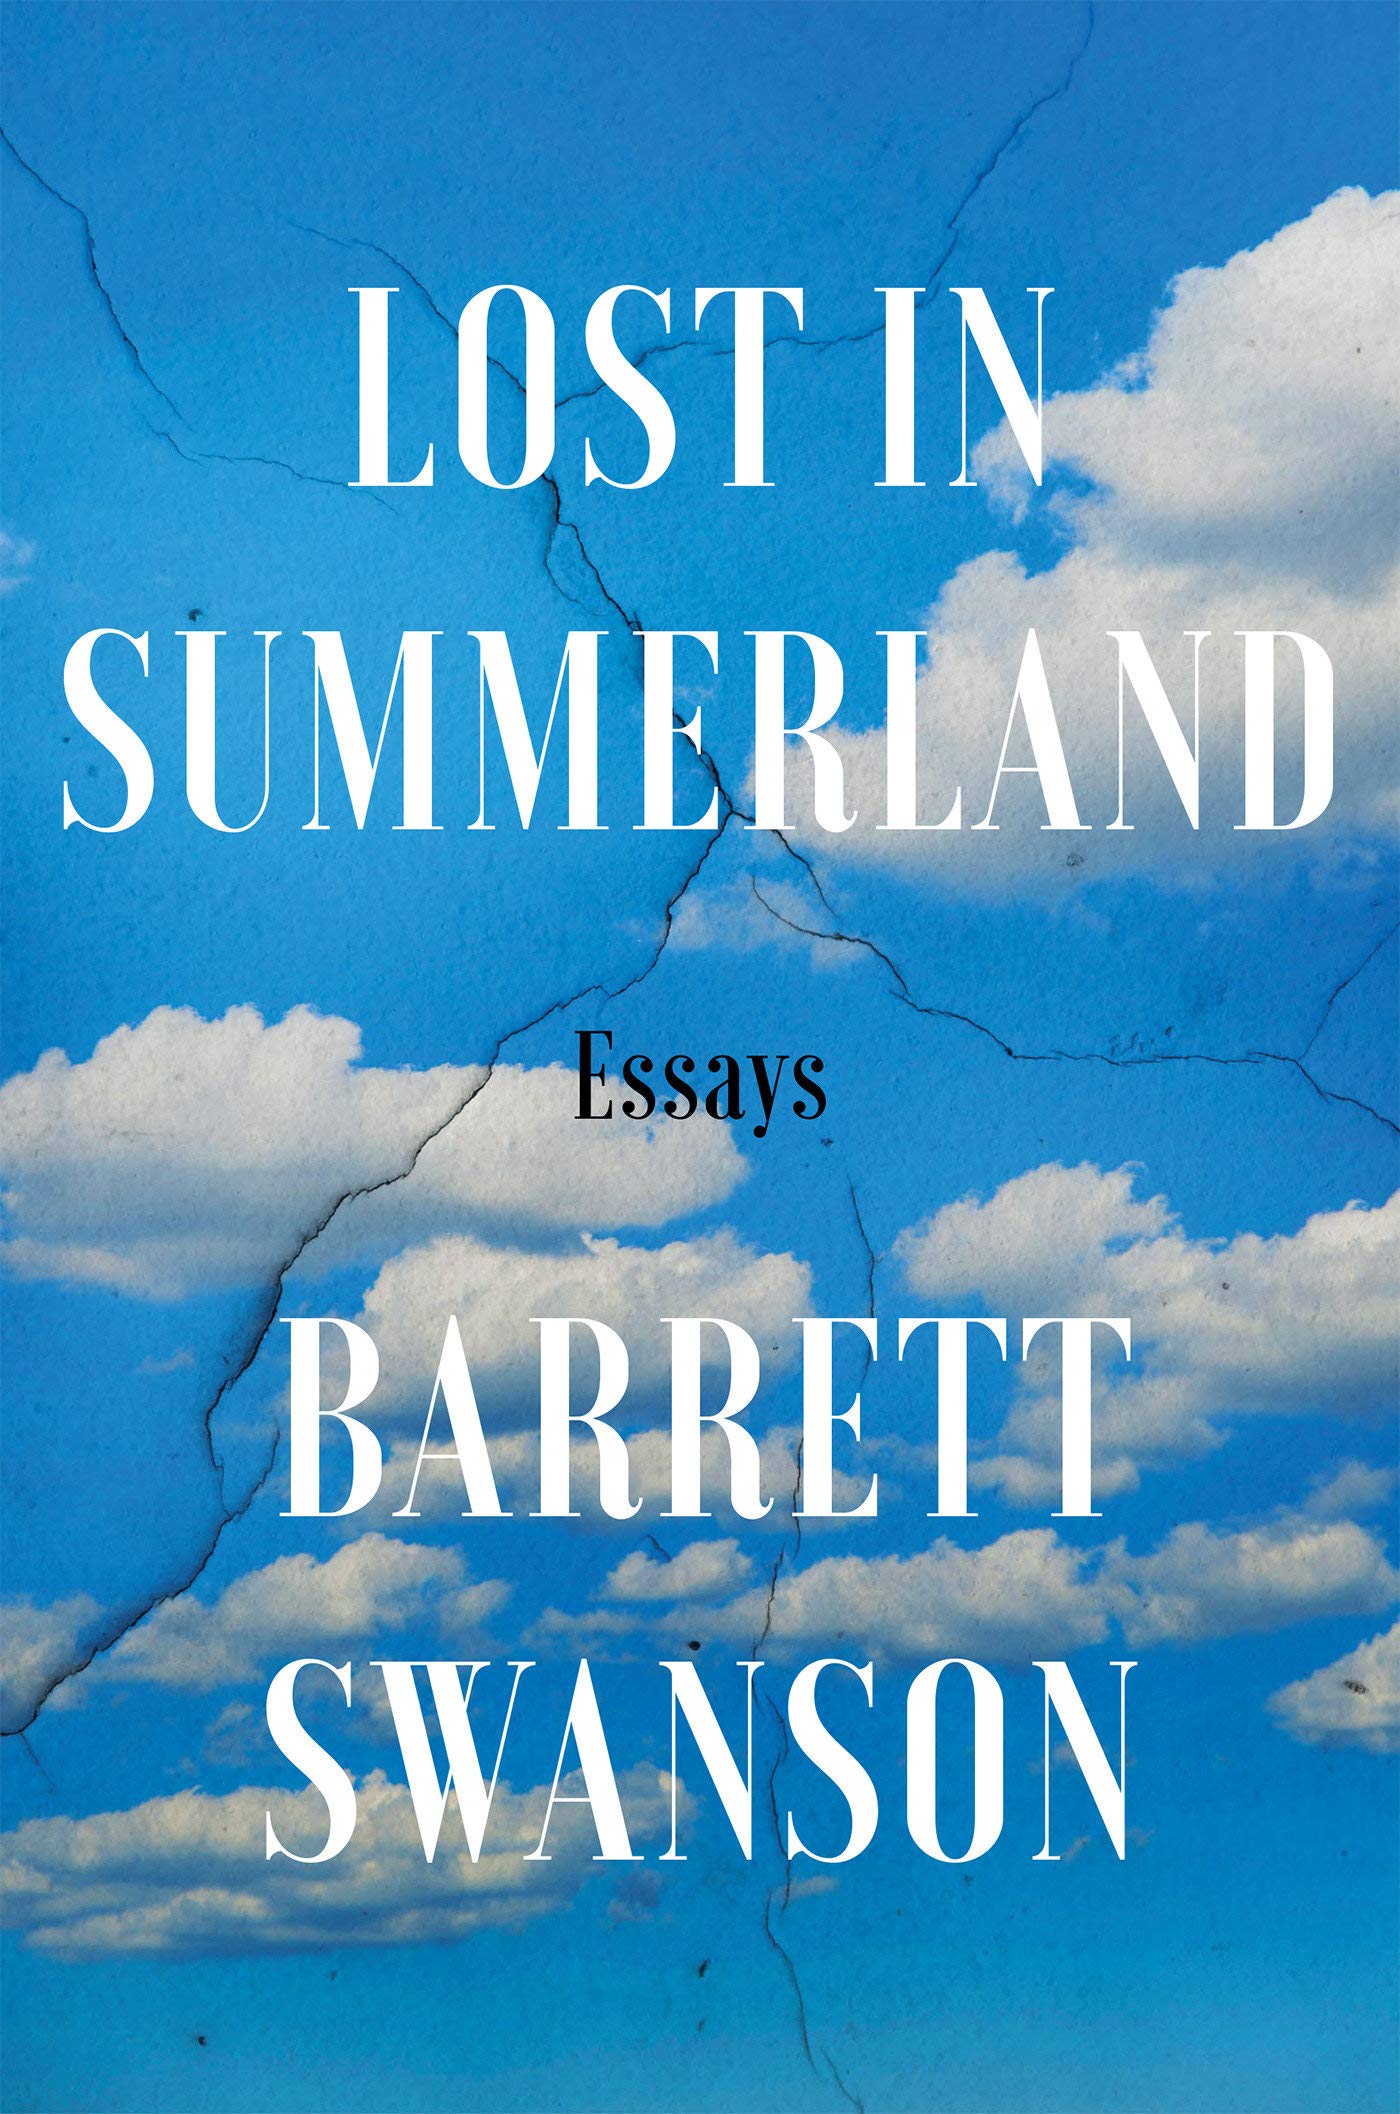 Barrett Swanson, <a class="external" href="https://bookshop.org/a/317/9781640094185" target="_blank" rel="noopener"><em>Lost in Summerland</em></a>, cover design by Alison Forner; Counterpoint (May 18)